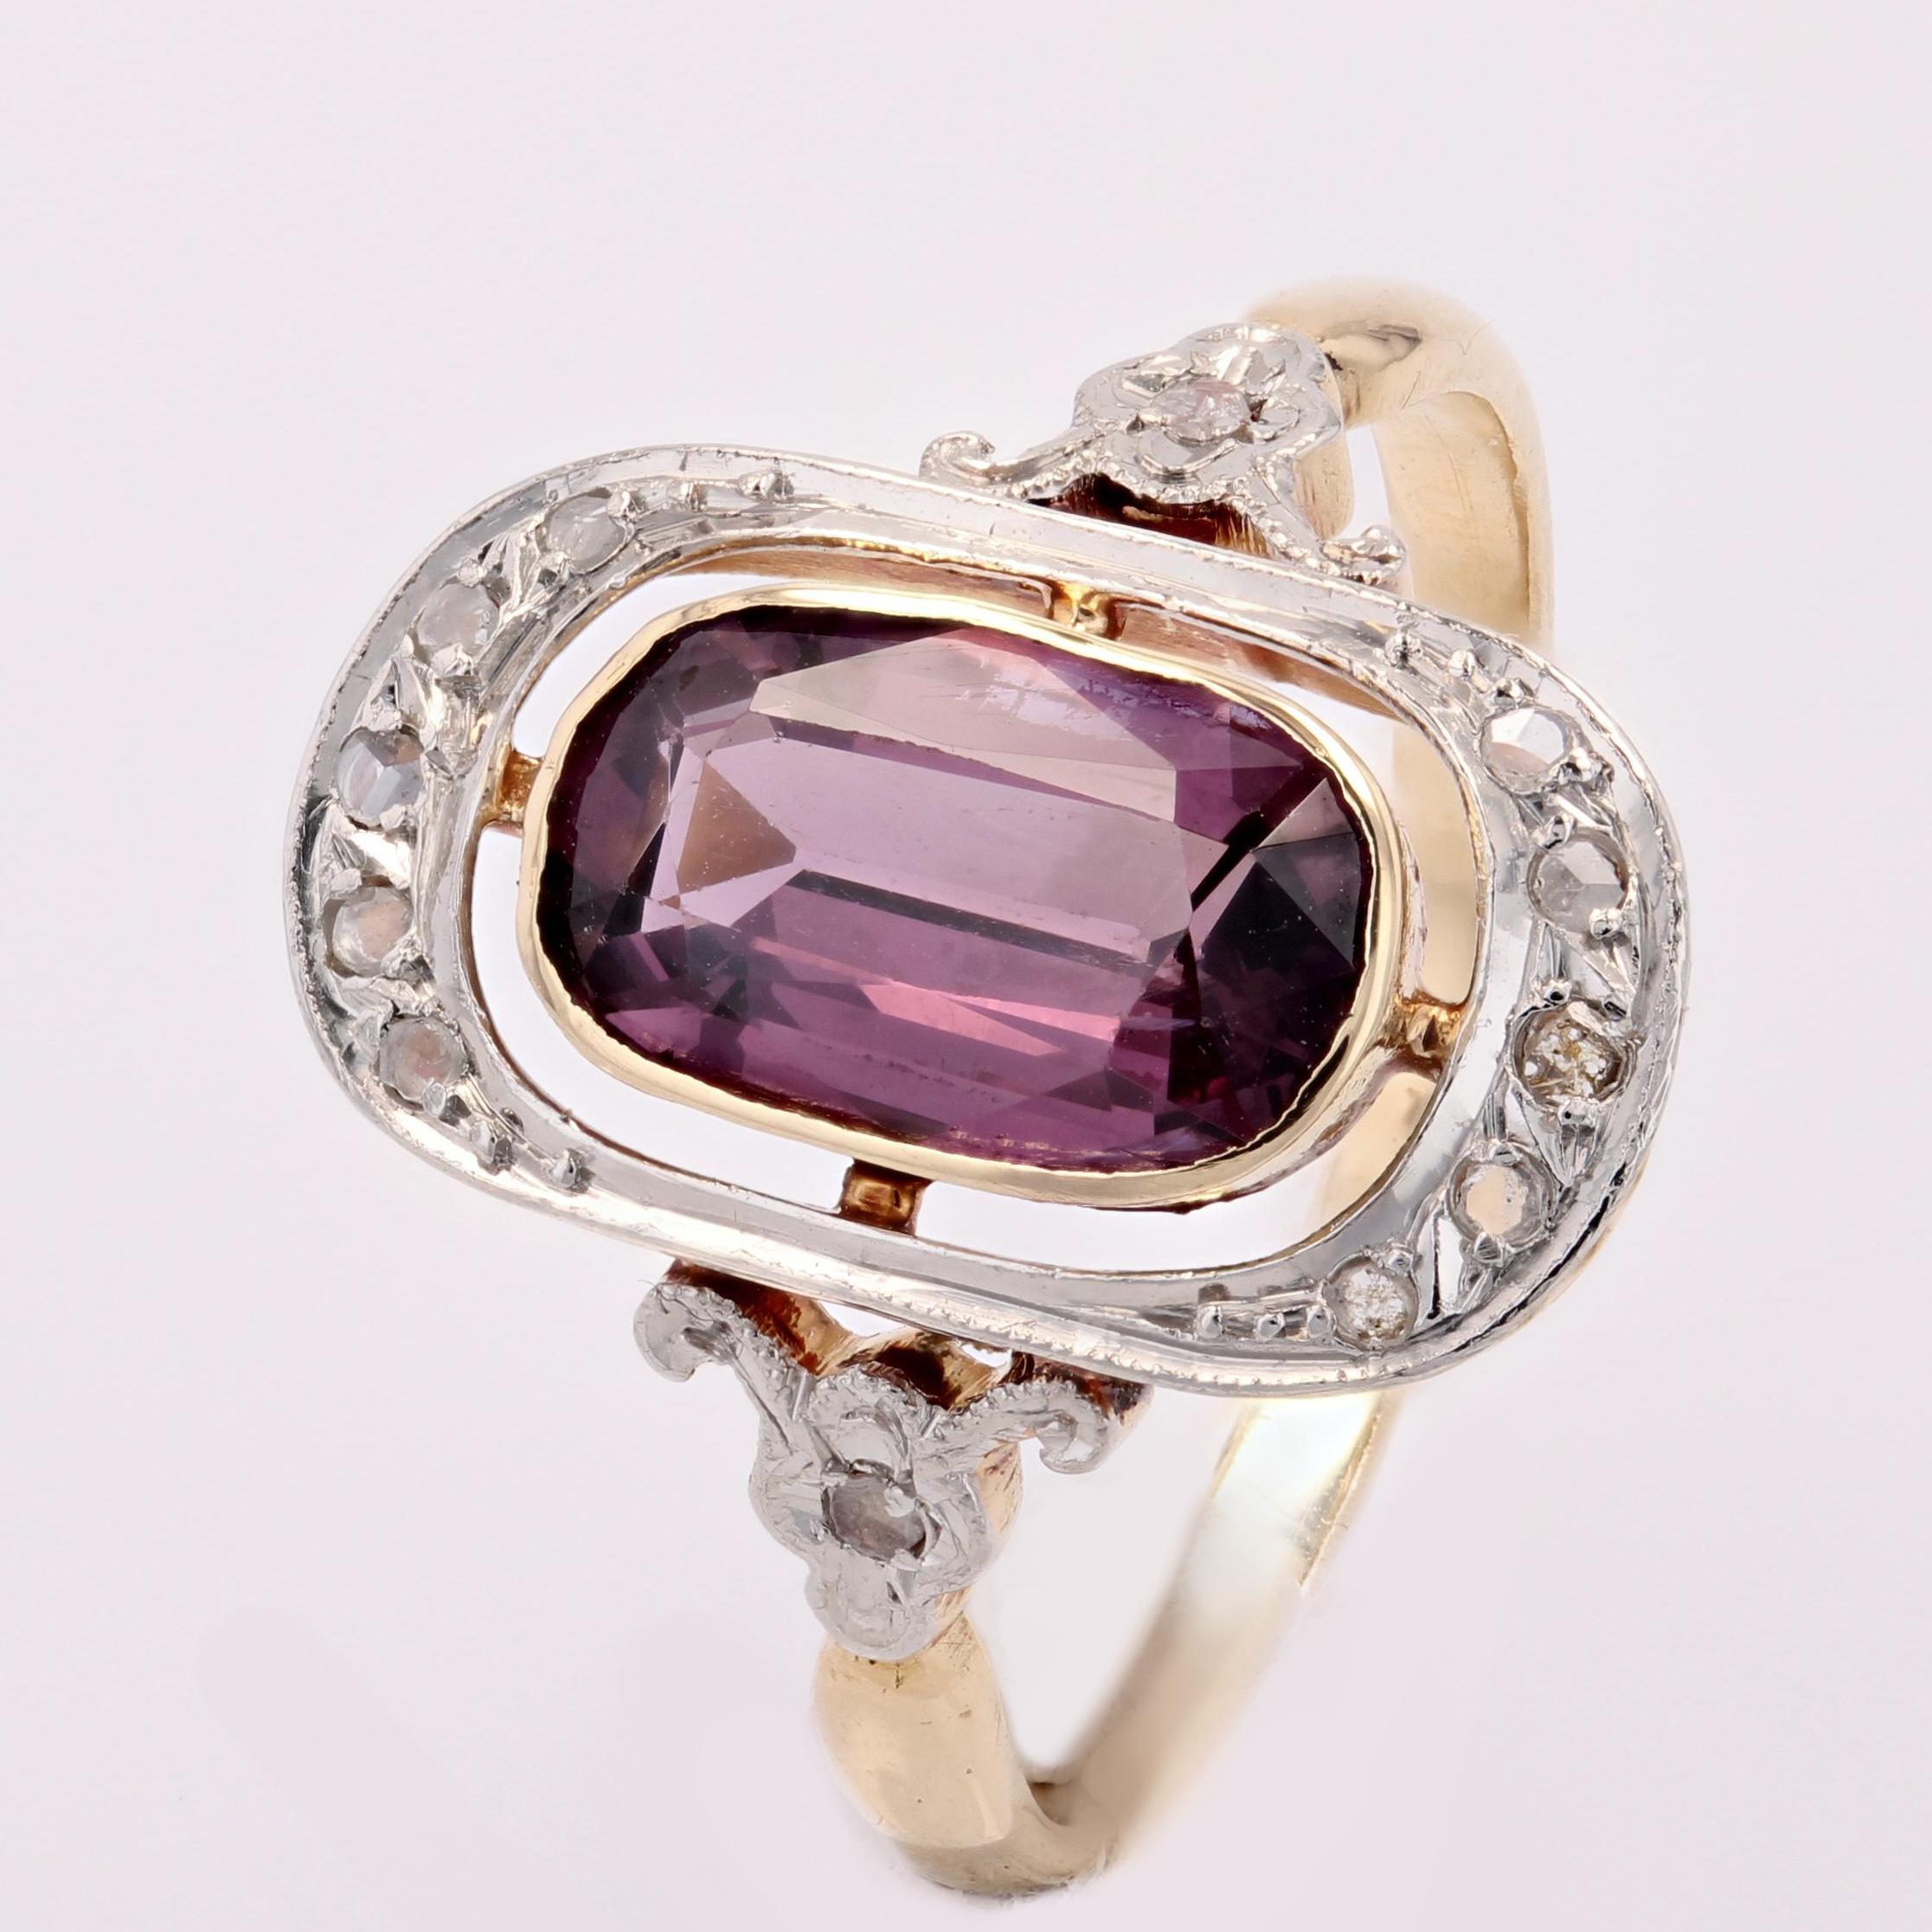 French 1900s Belle Epoque Violet Spinel Diamonds 18 Karat Yellow Gold Ring For Sale 3